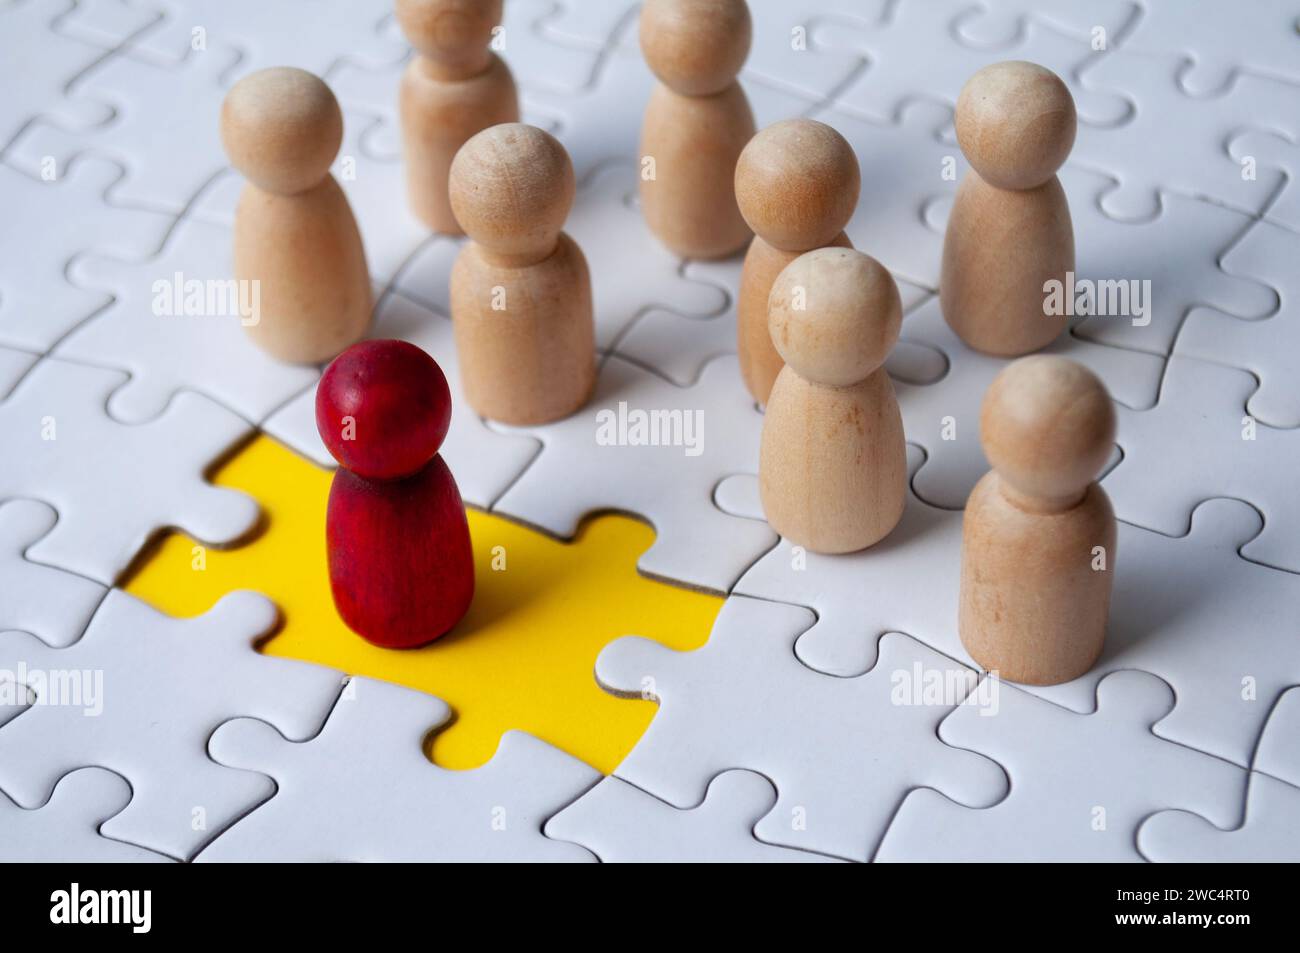 Wooden dolls on top of jigsaw with missing jigsaw puzzle. Hiring and employment concept. Stock Photo